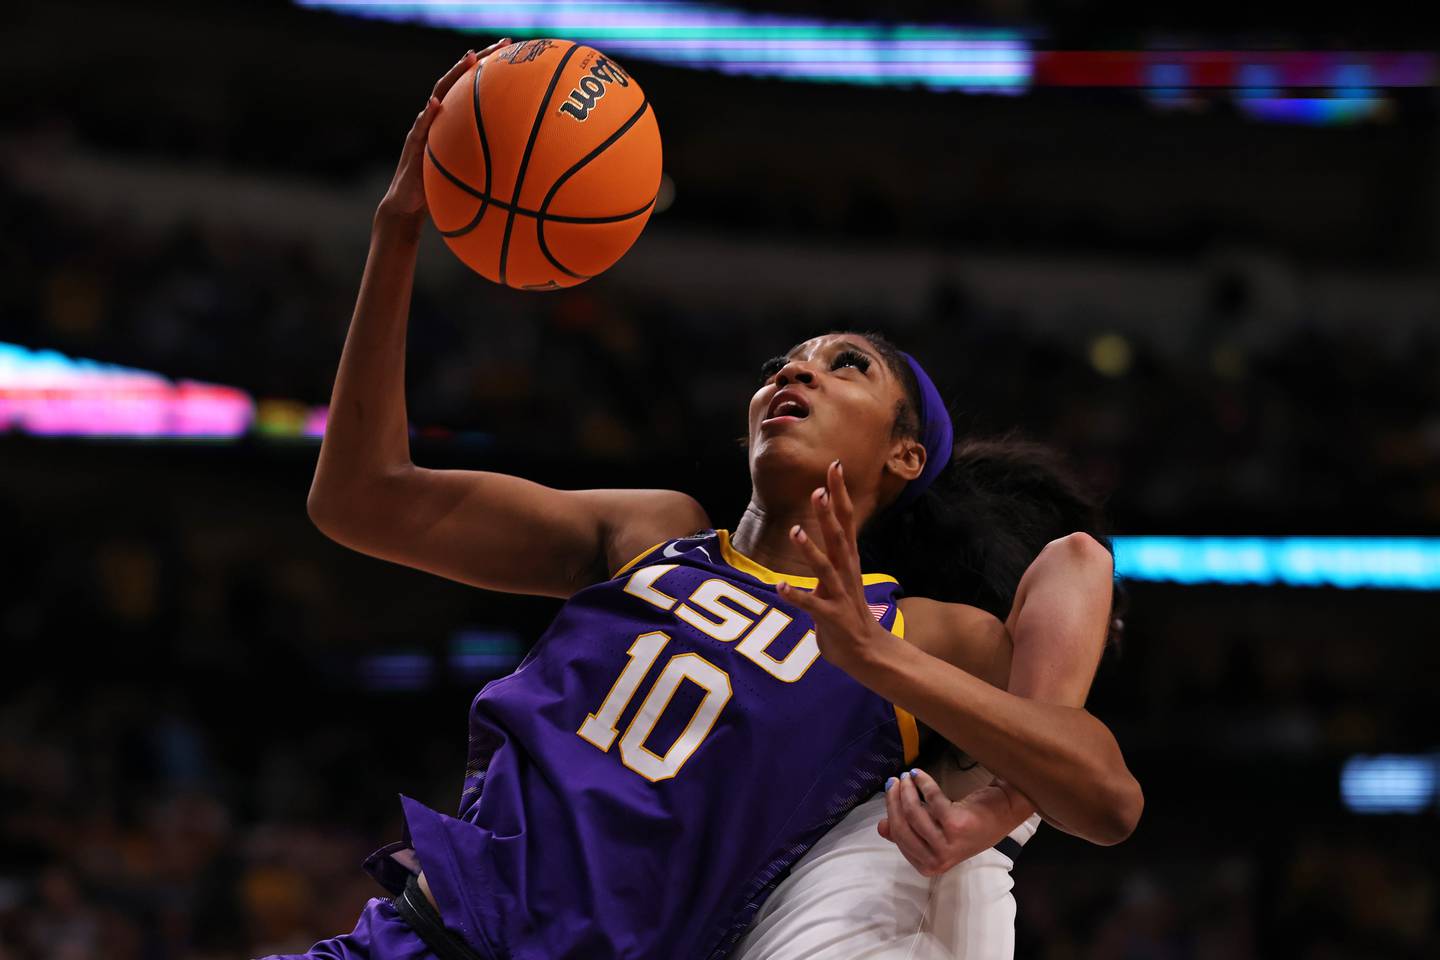 DALLAS, TEXAS - APRIL 02: Angel Reese #10 of the LSU Lady Tigers battles for the ball during the third quarter against the Iowa Hawkeyes during the 2023 NCAA Women's Basketball Tournament championship game at American Airlines Center on April 02, 2023 in Dallas, Texas.